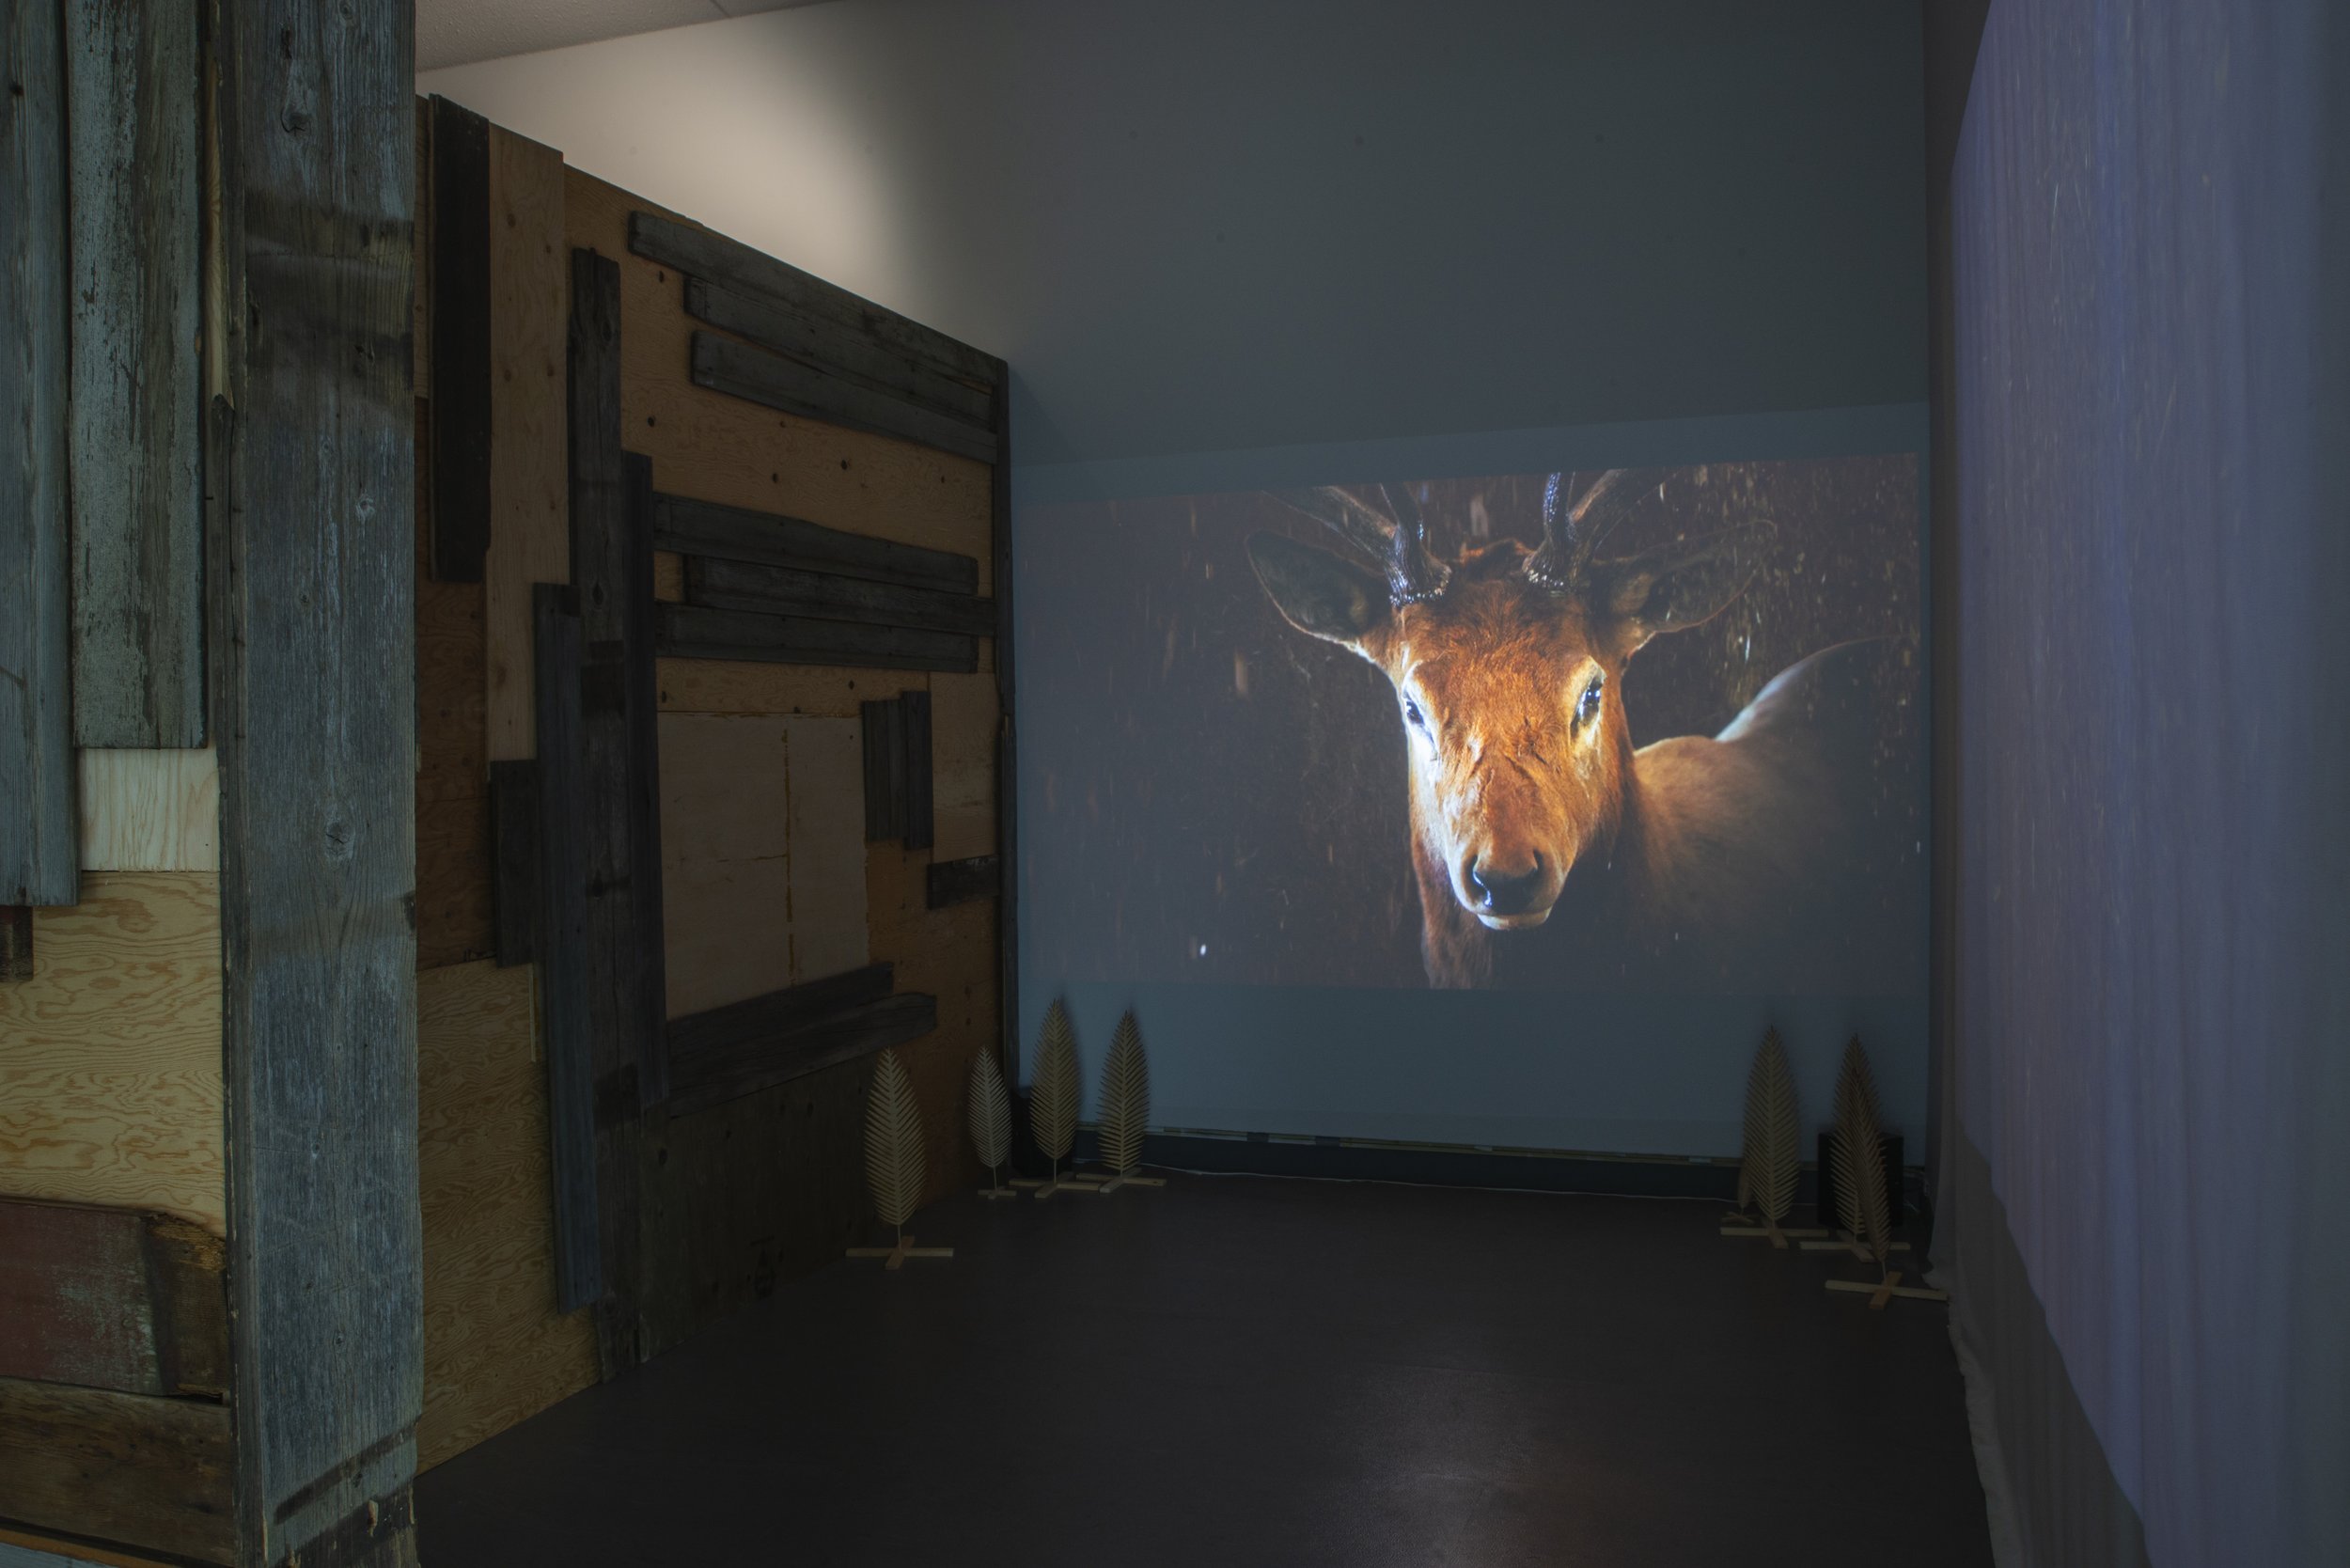  Installation view, audio and video projection. 